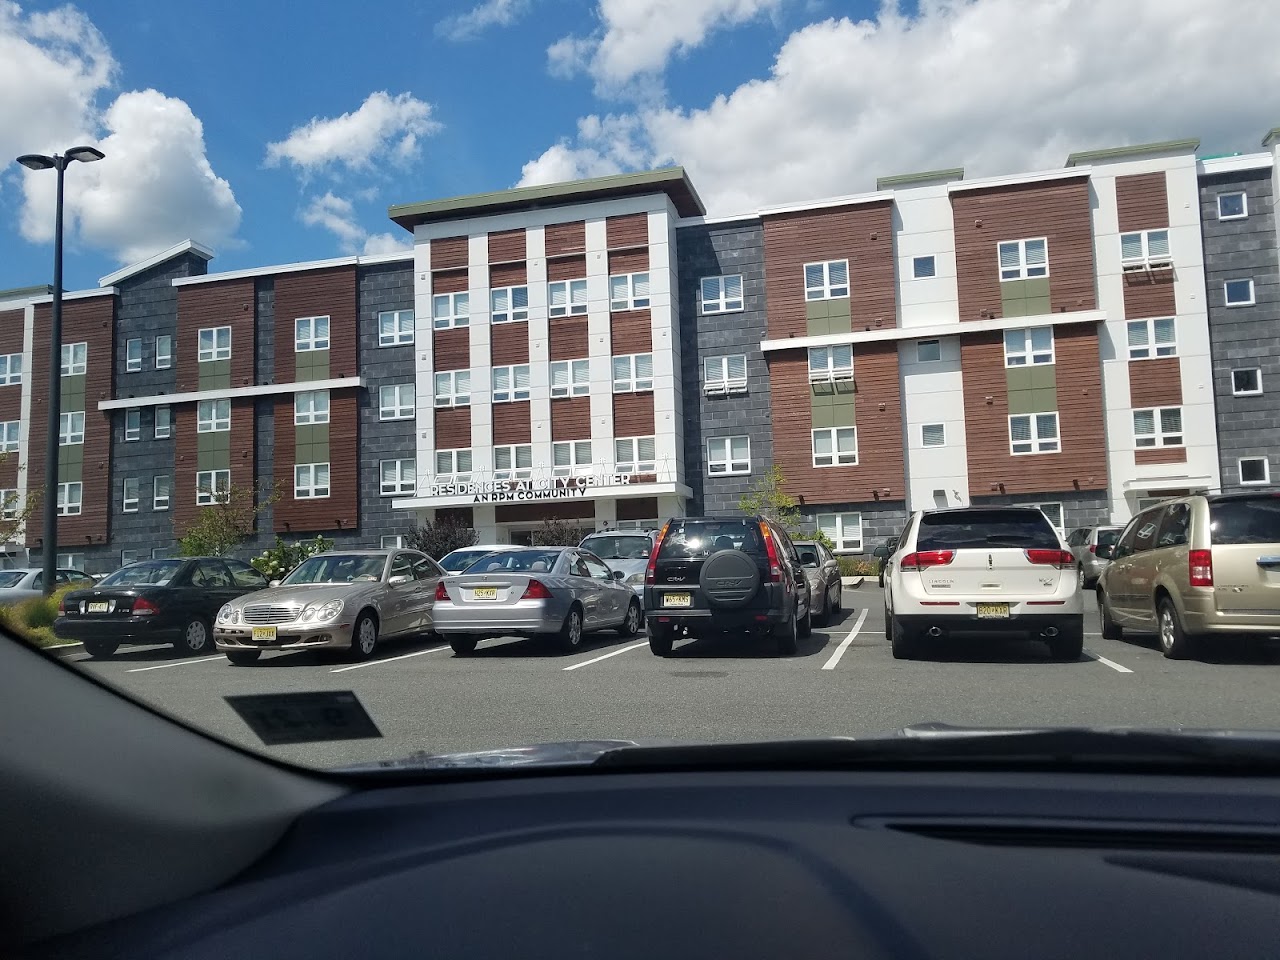 Photo of CITY CENTER - MIXED USE. Affordable housing located at MAIN ST. PLEASANTVILLE, NJ 08232